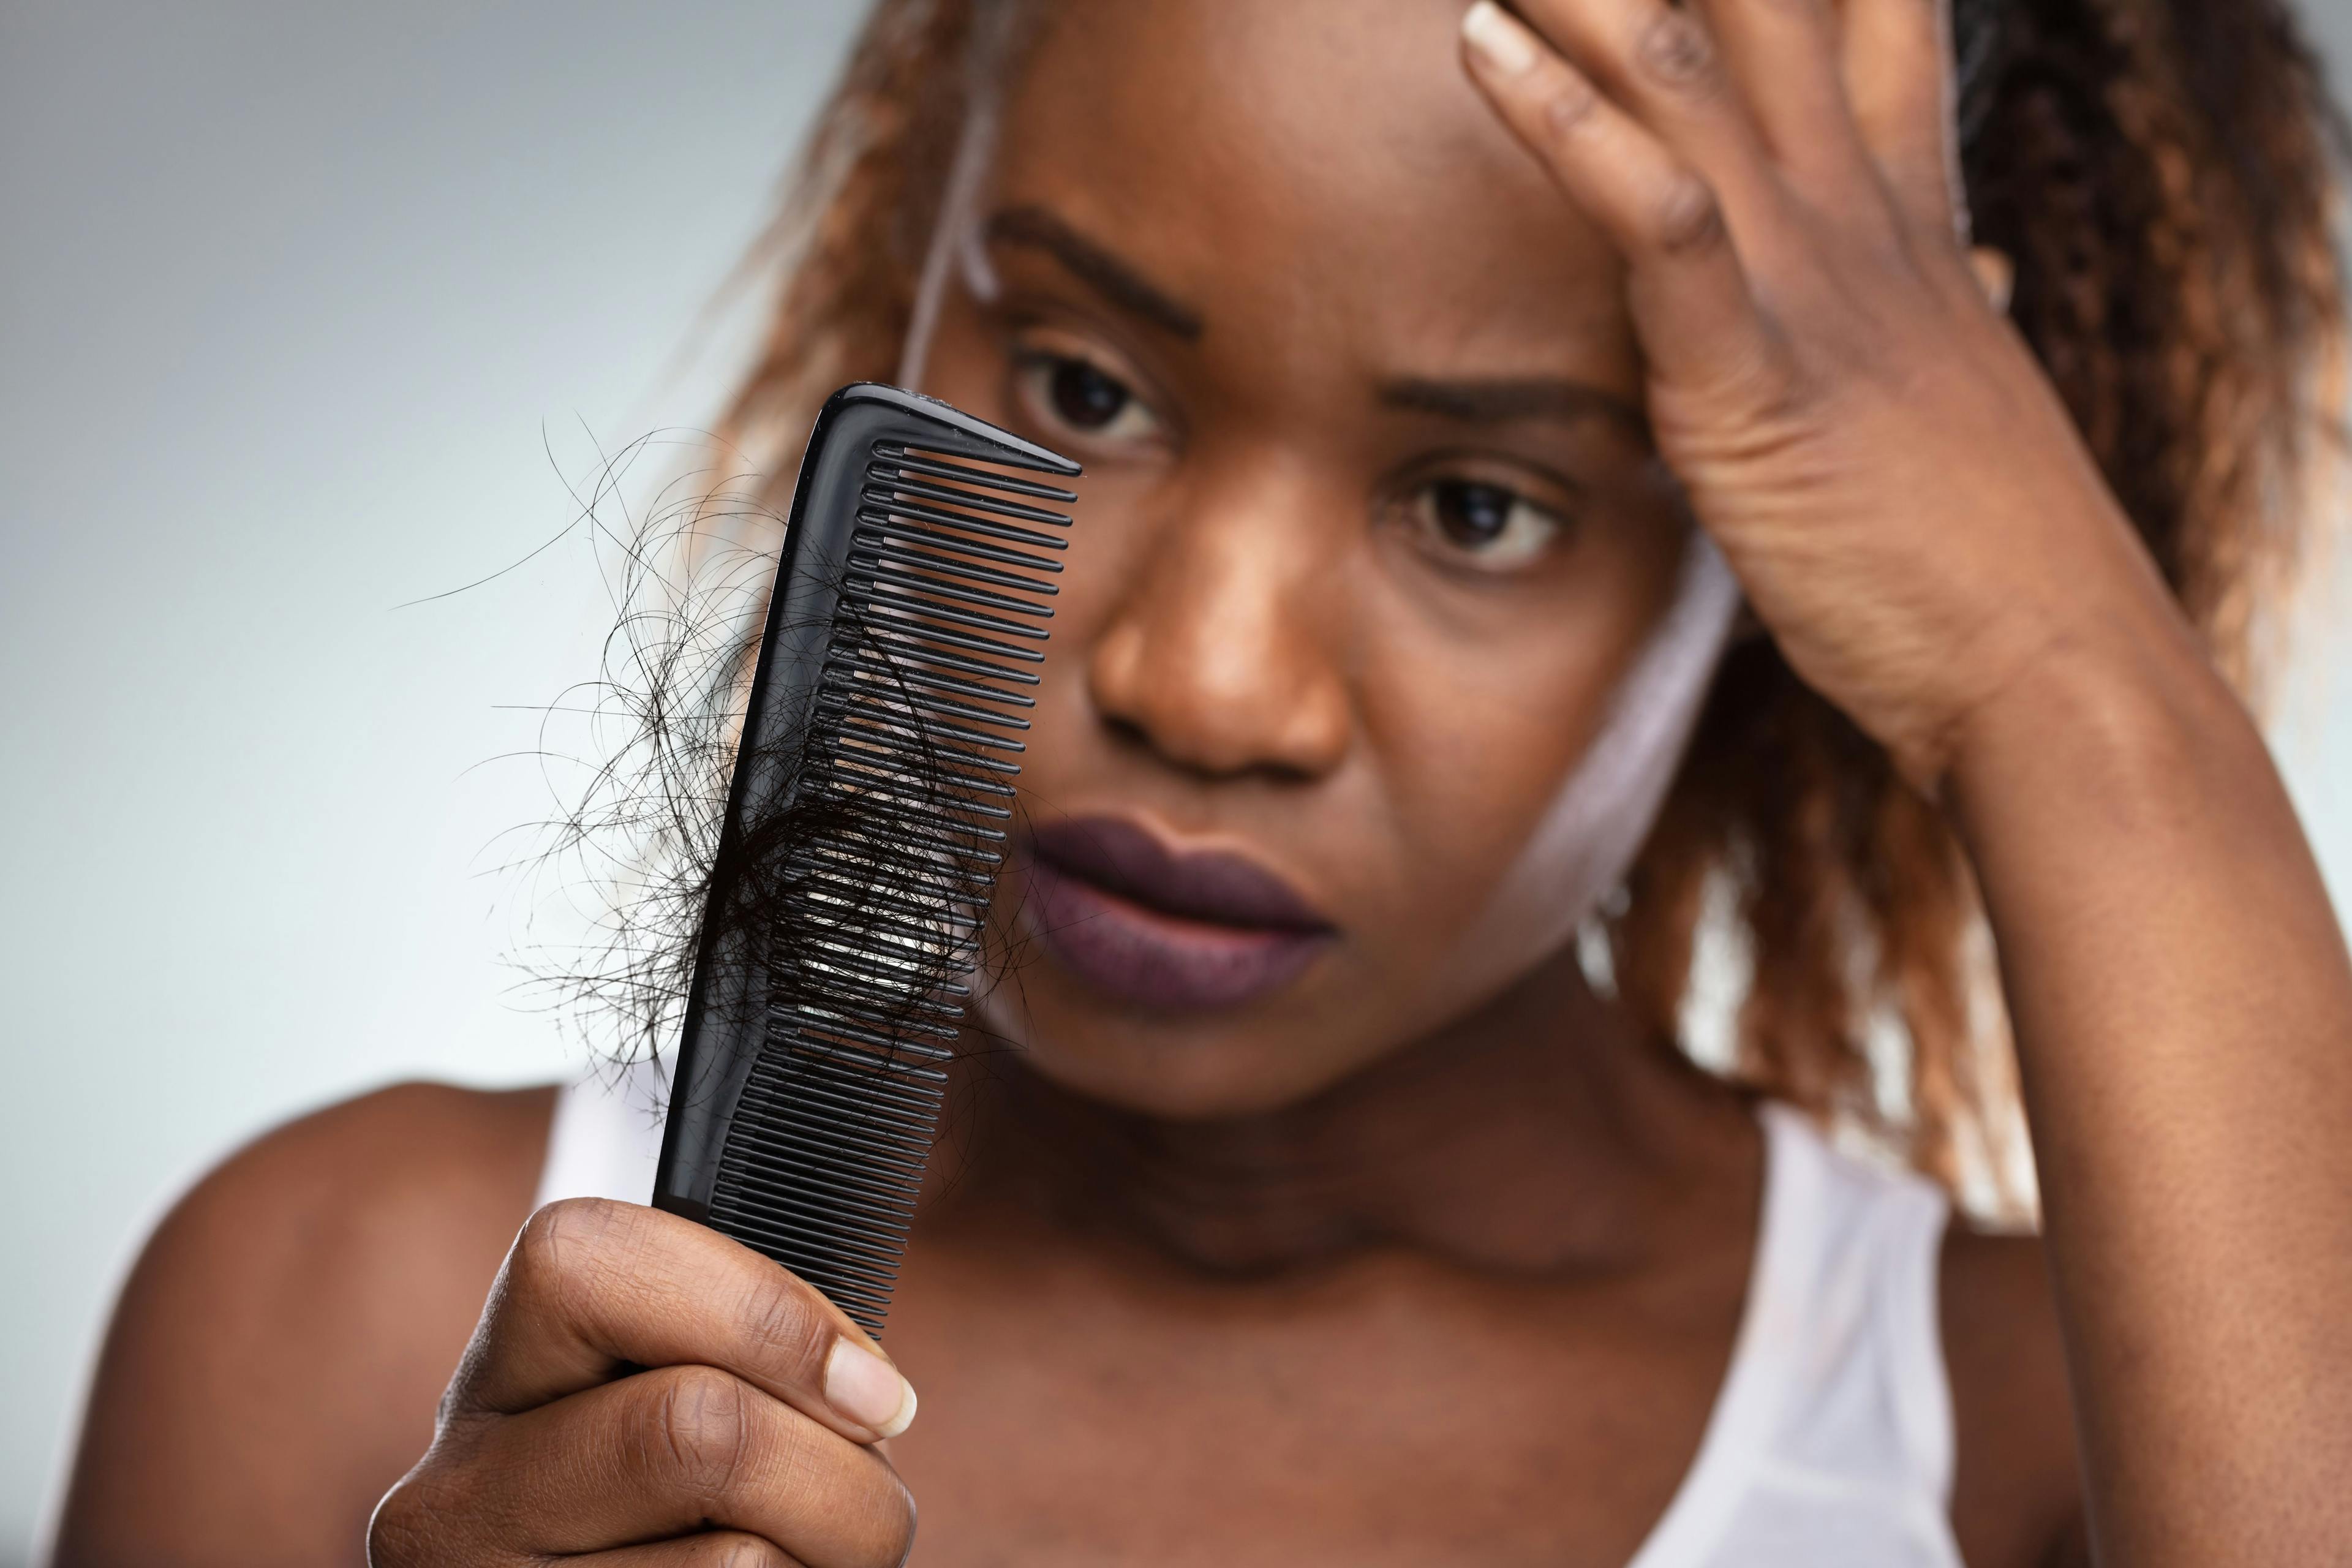 Quantifying is Key to Effective Hair Loss Treatment